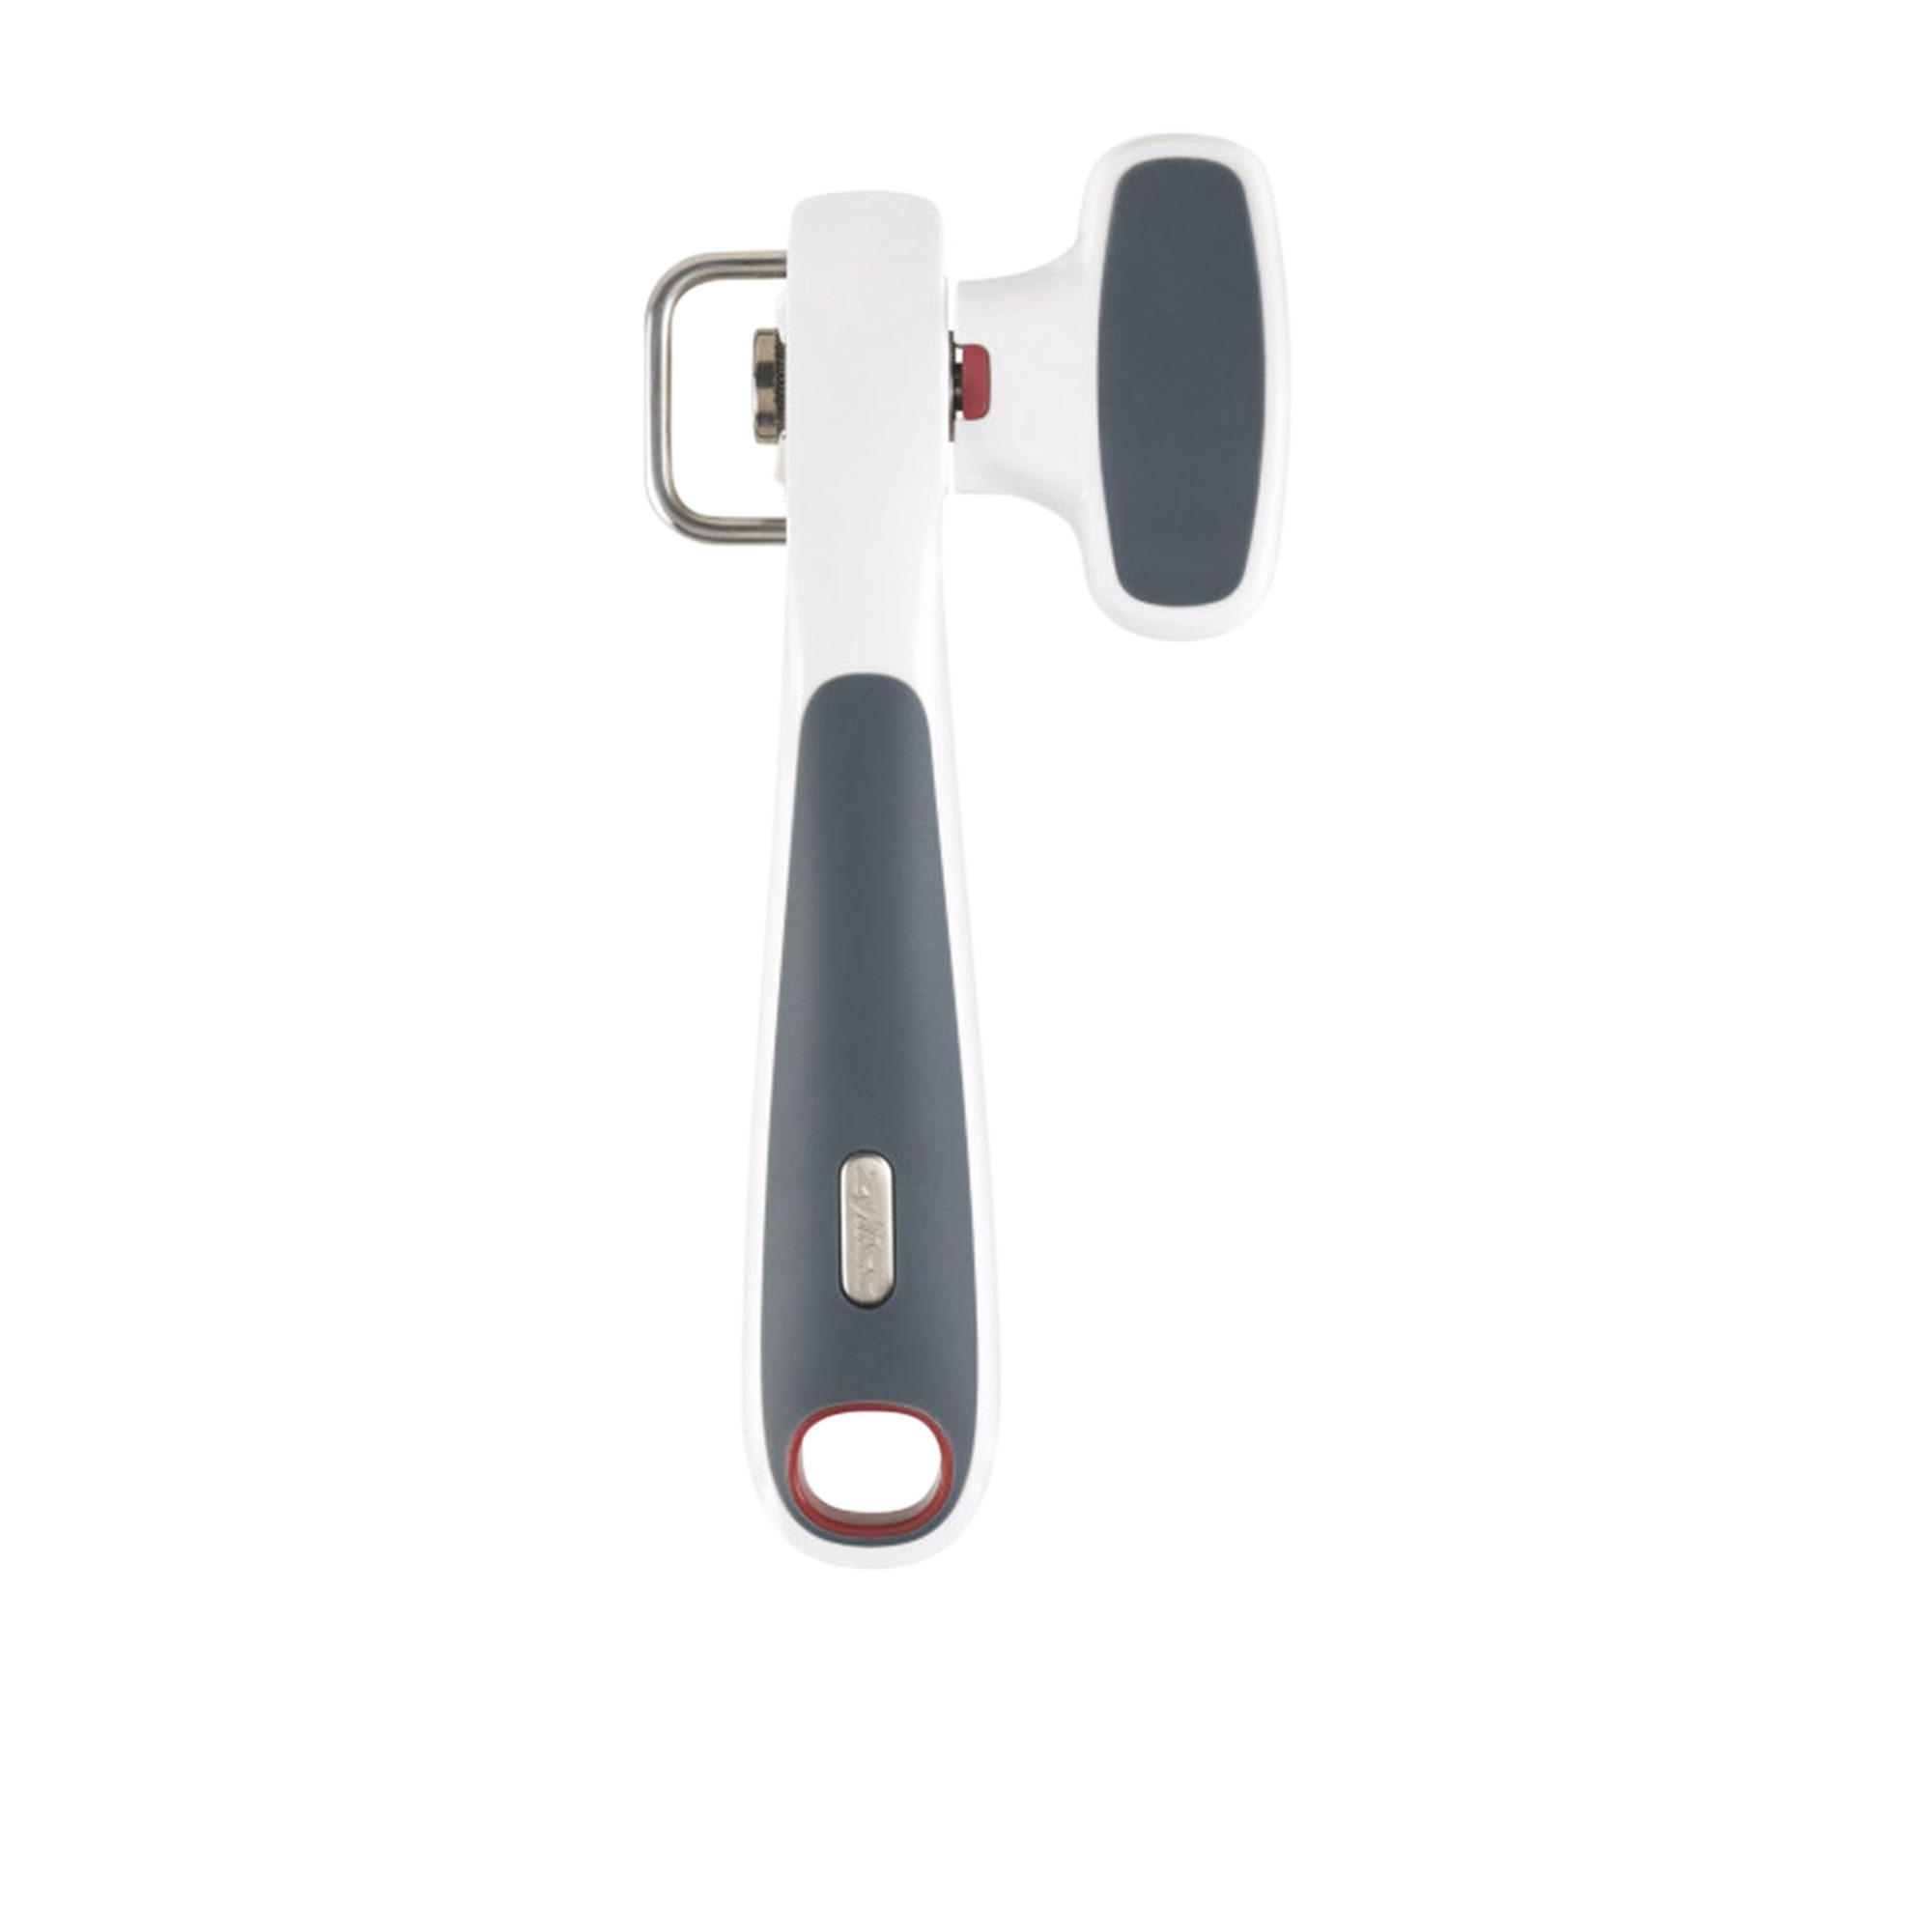 Zyliss Safe Edge Can Opener Image 1